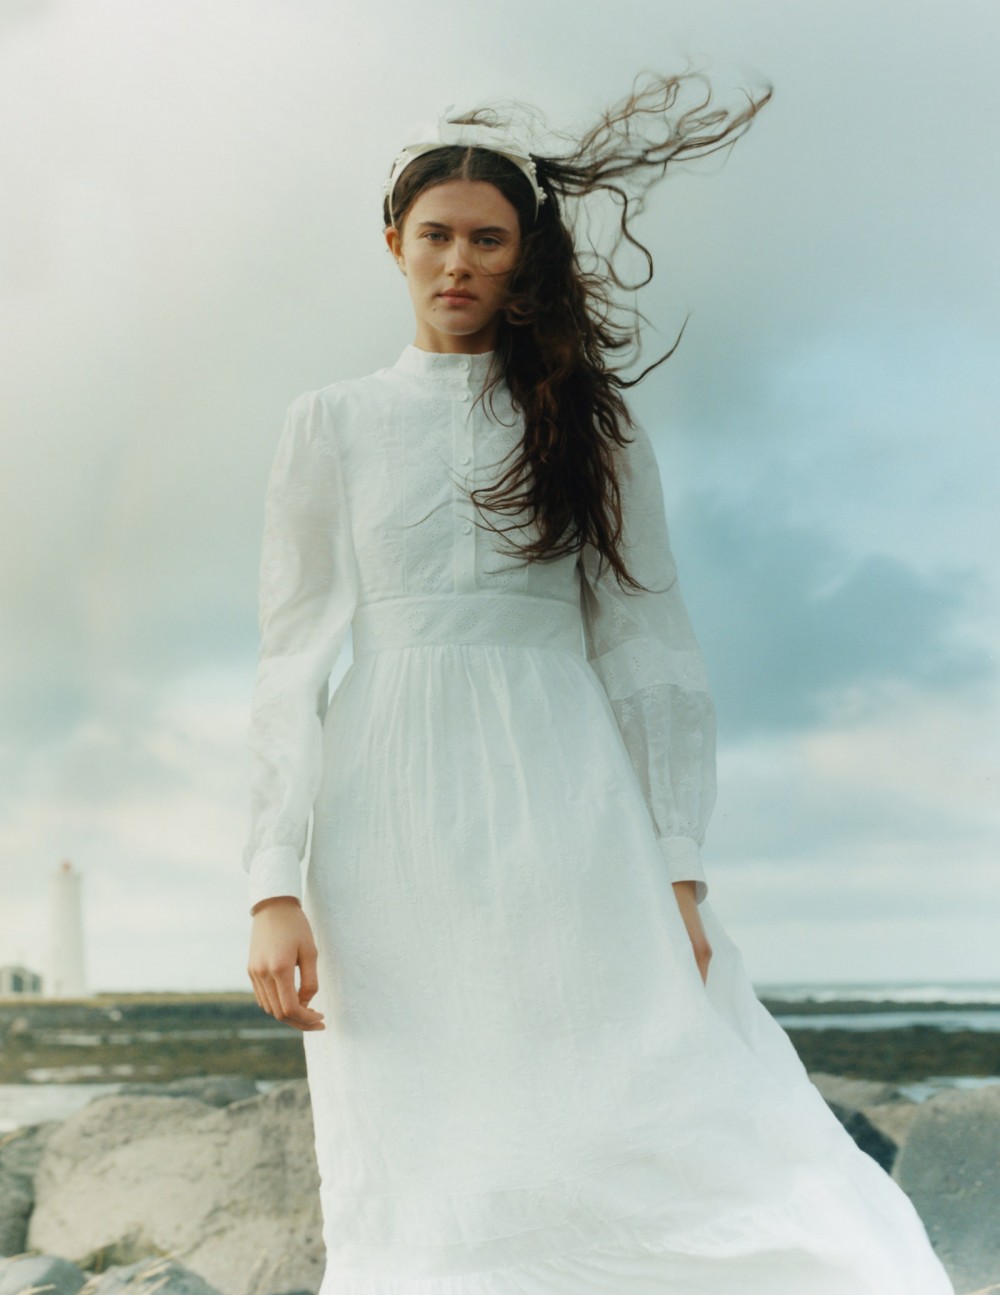 Erdem Launches His First Bridal Collection